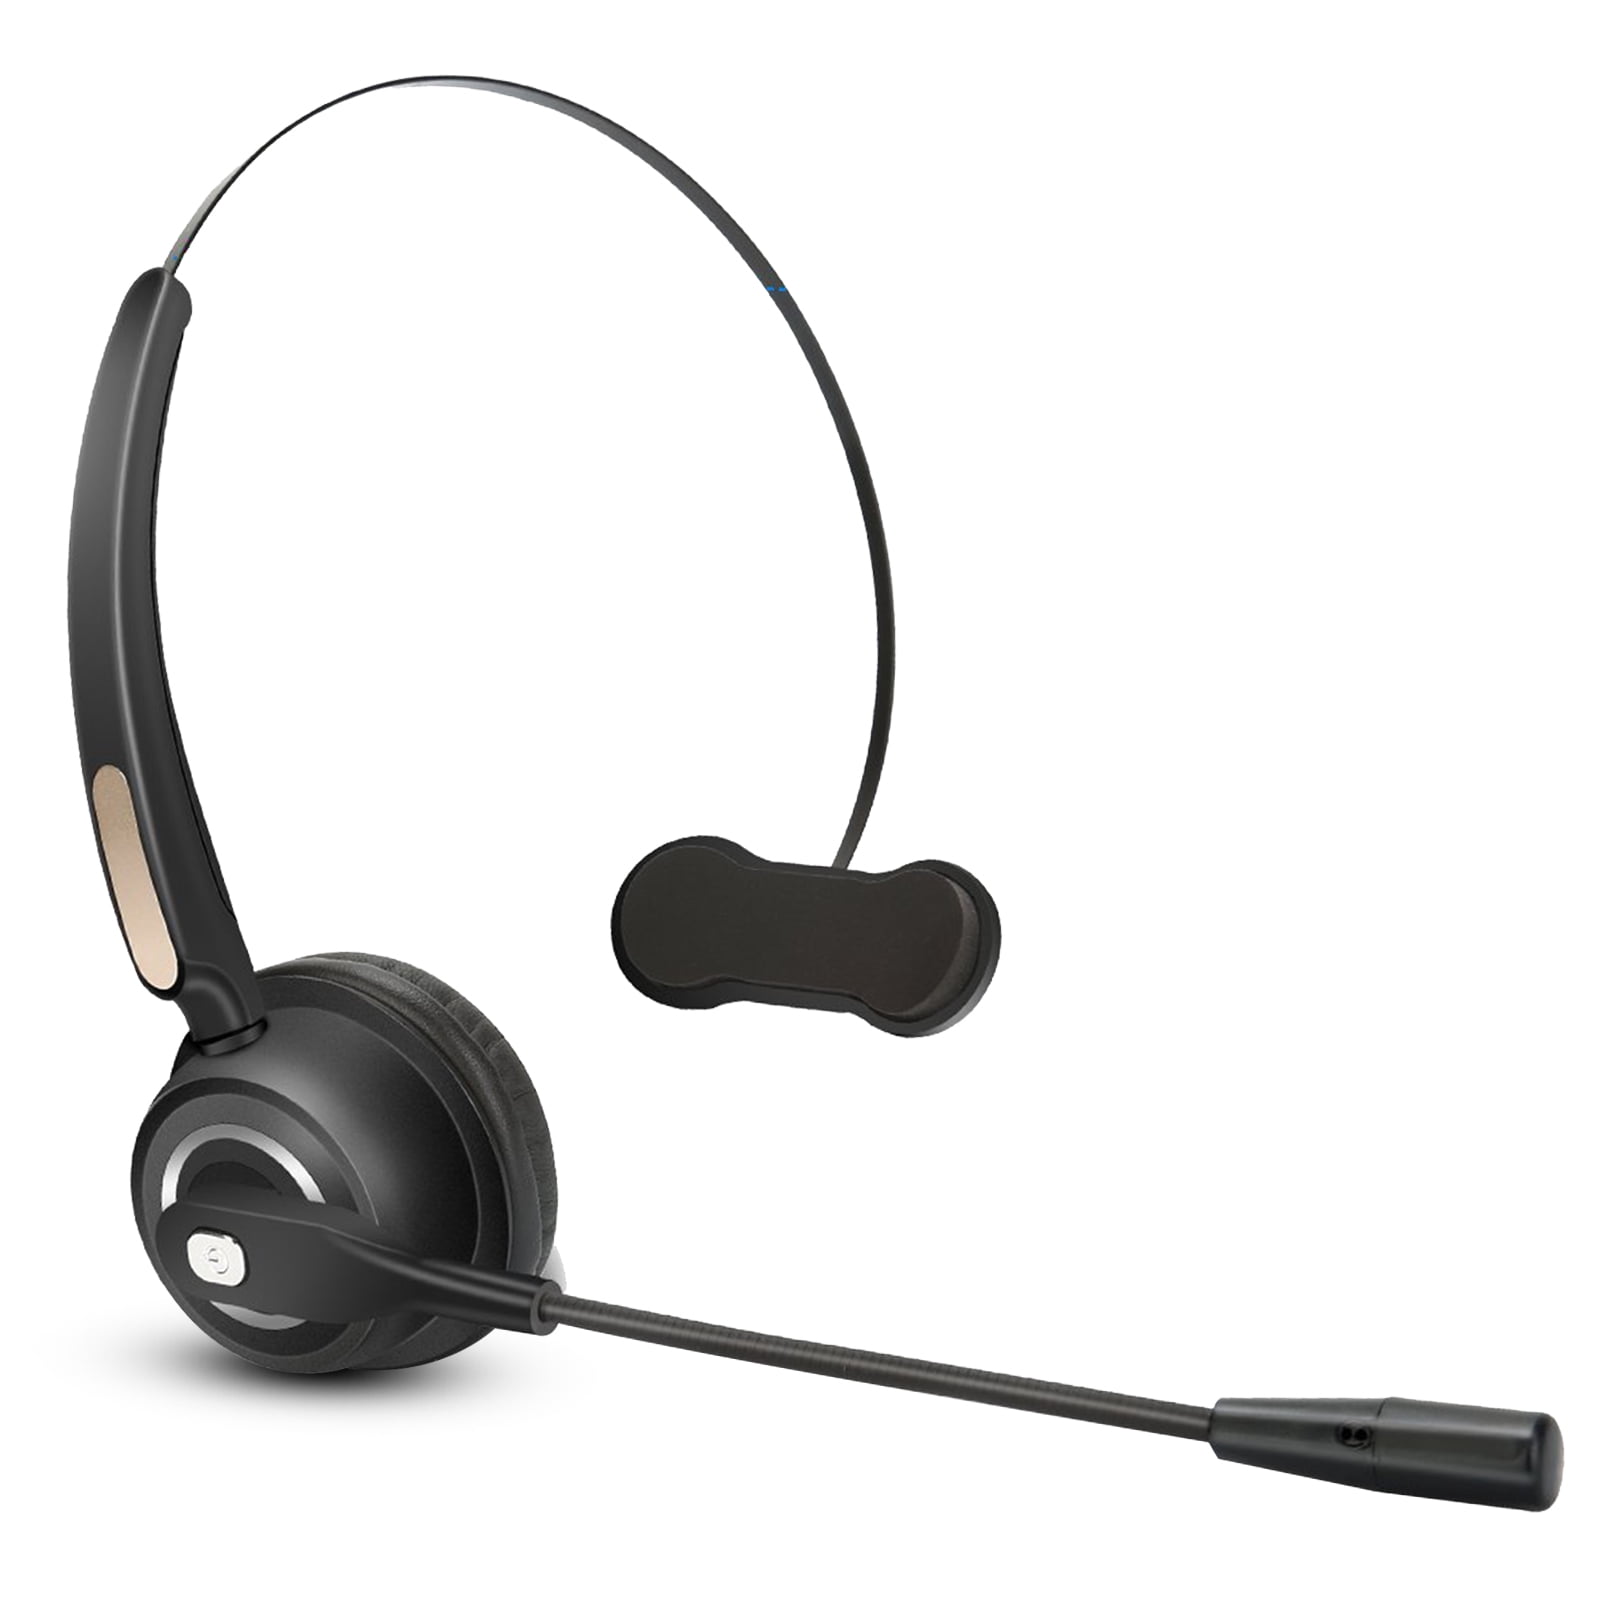 Headset with mic - letnored